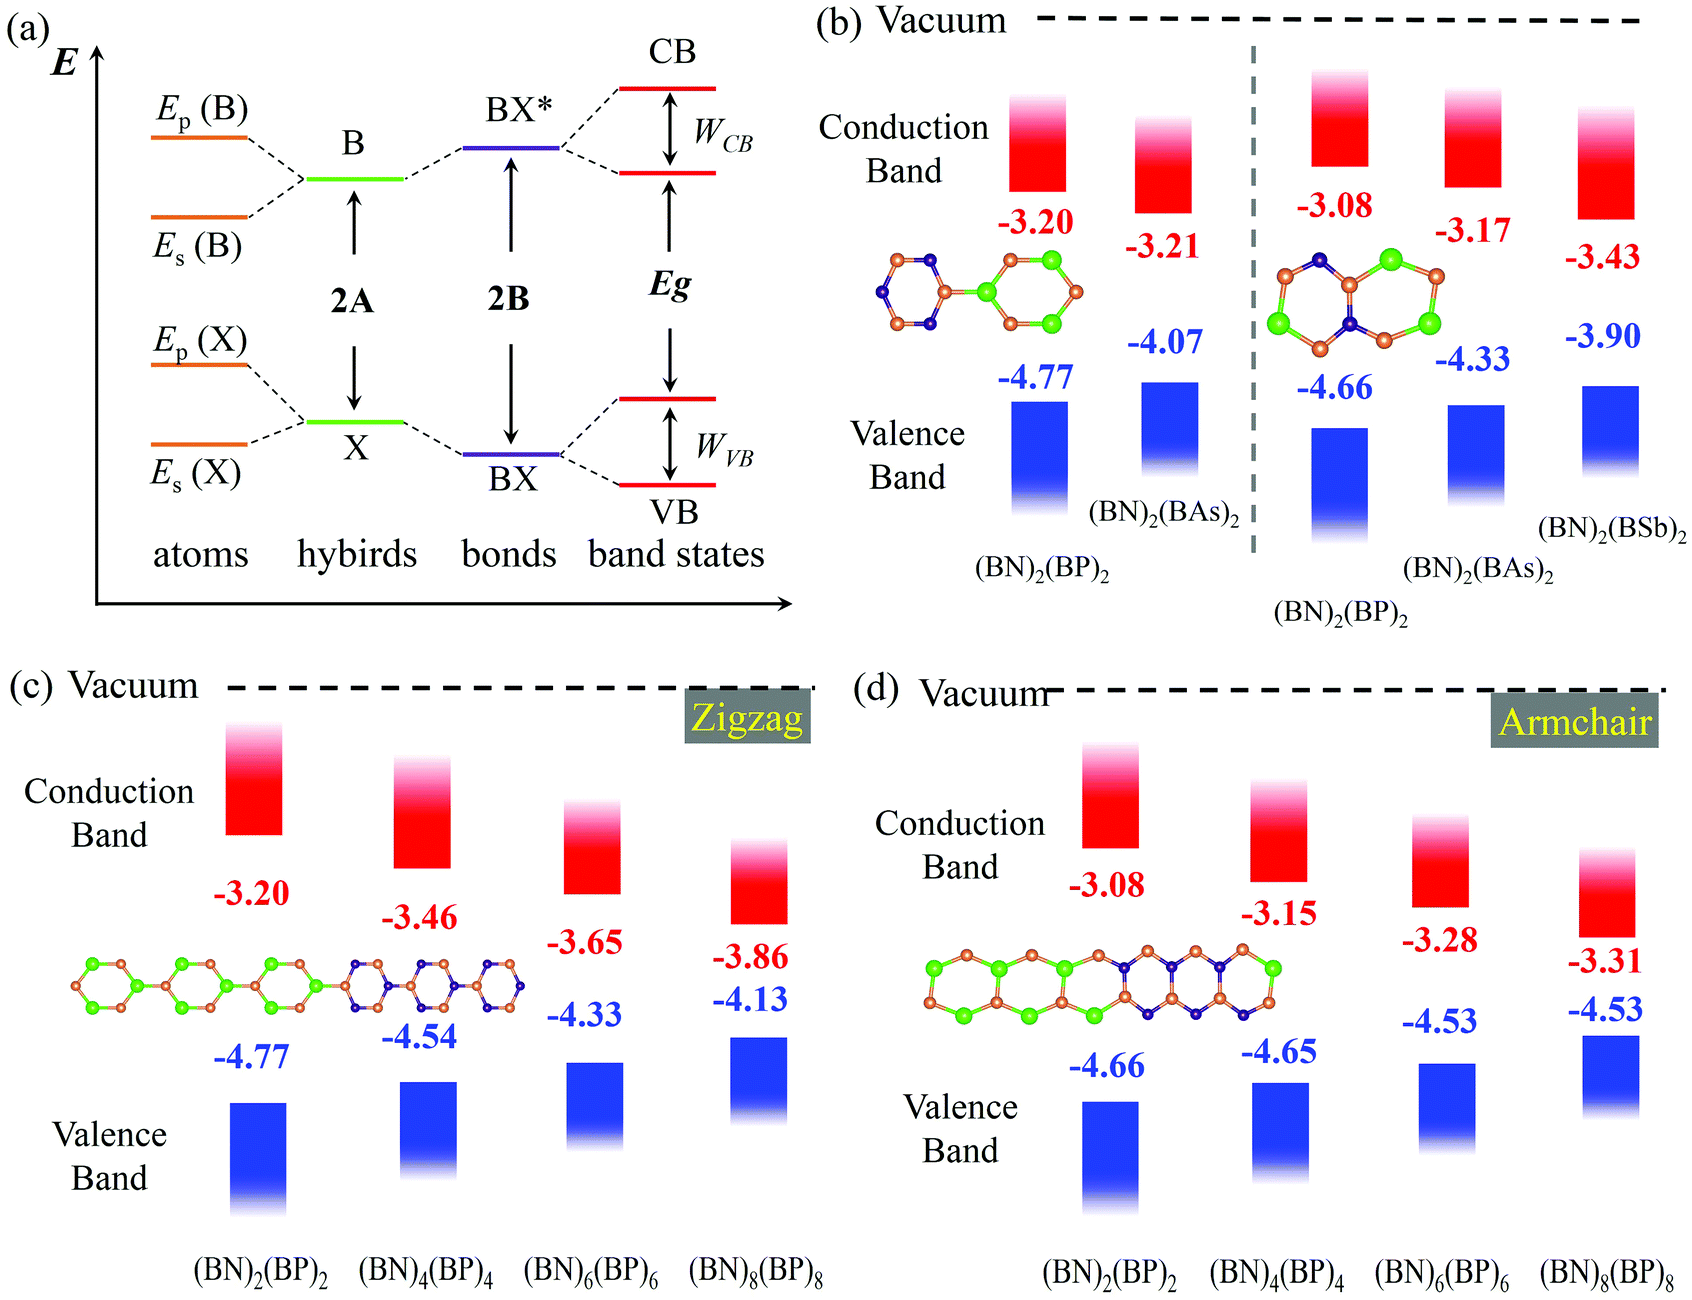 Band Offsets In New Bn Bx X P As Sb Lateral Heterostructures Based On Bond Orbital Theory Nanoscale Rsc Publishing Doi 10 1039 C8nra